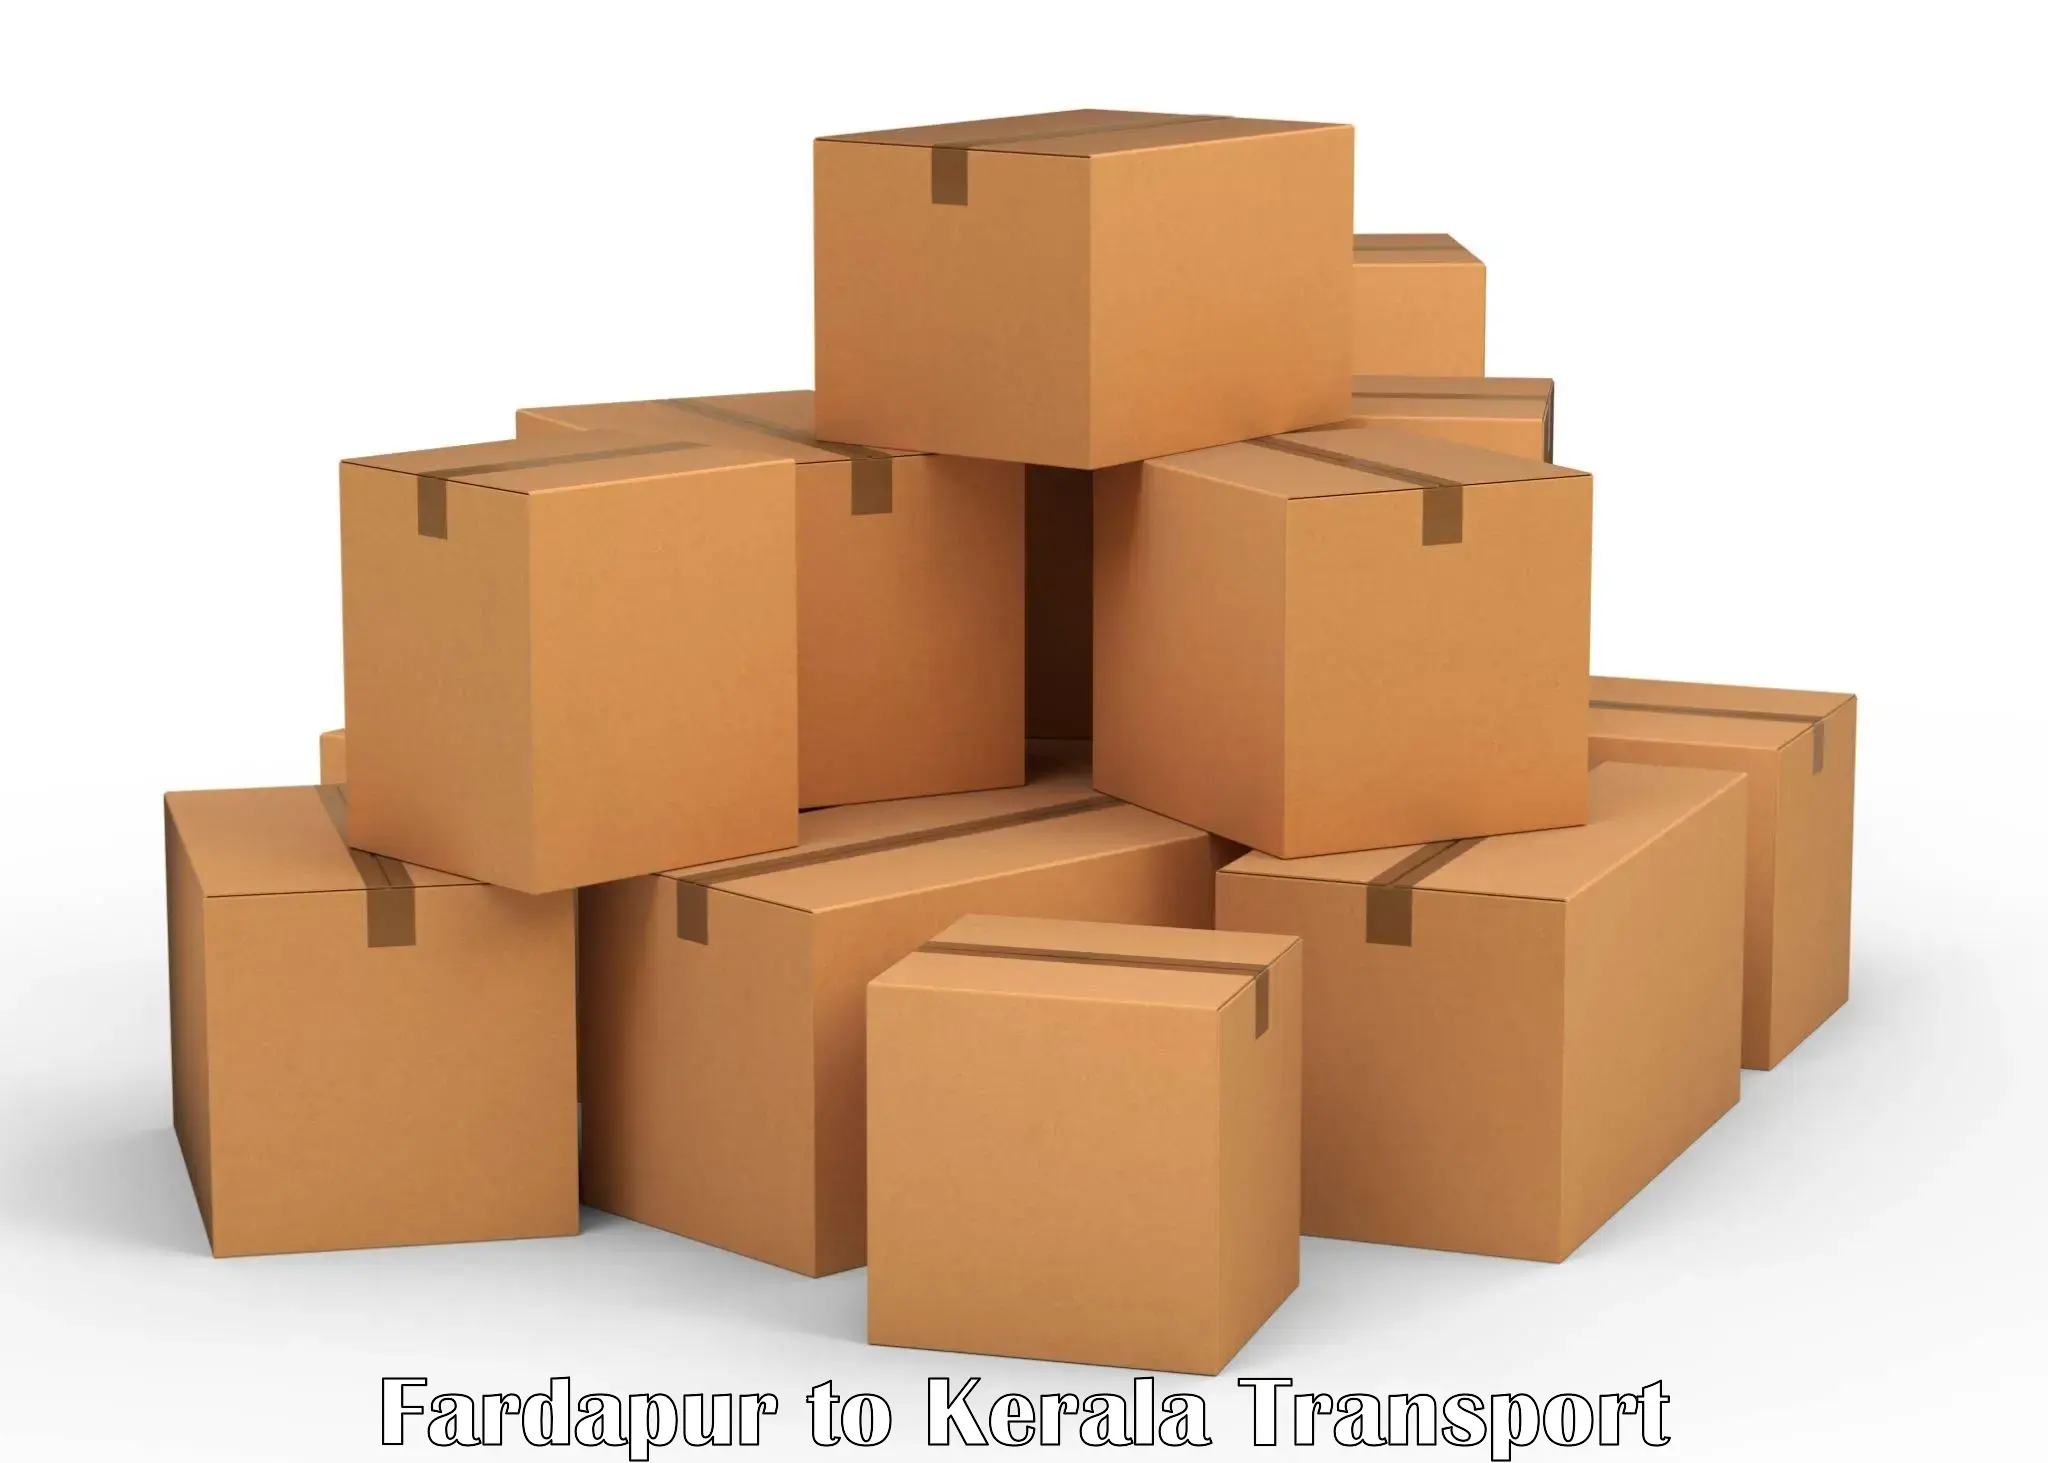 Daily parcel service transport Fardapur to Pathanamthitta